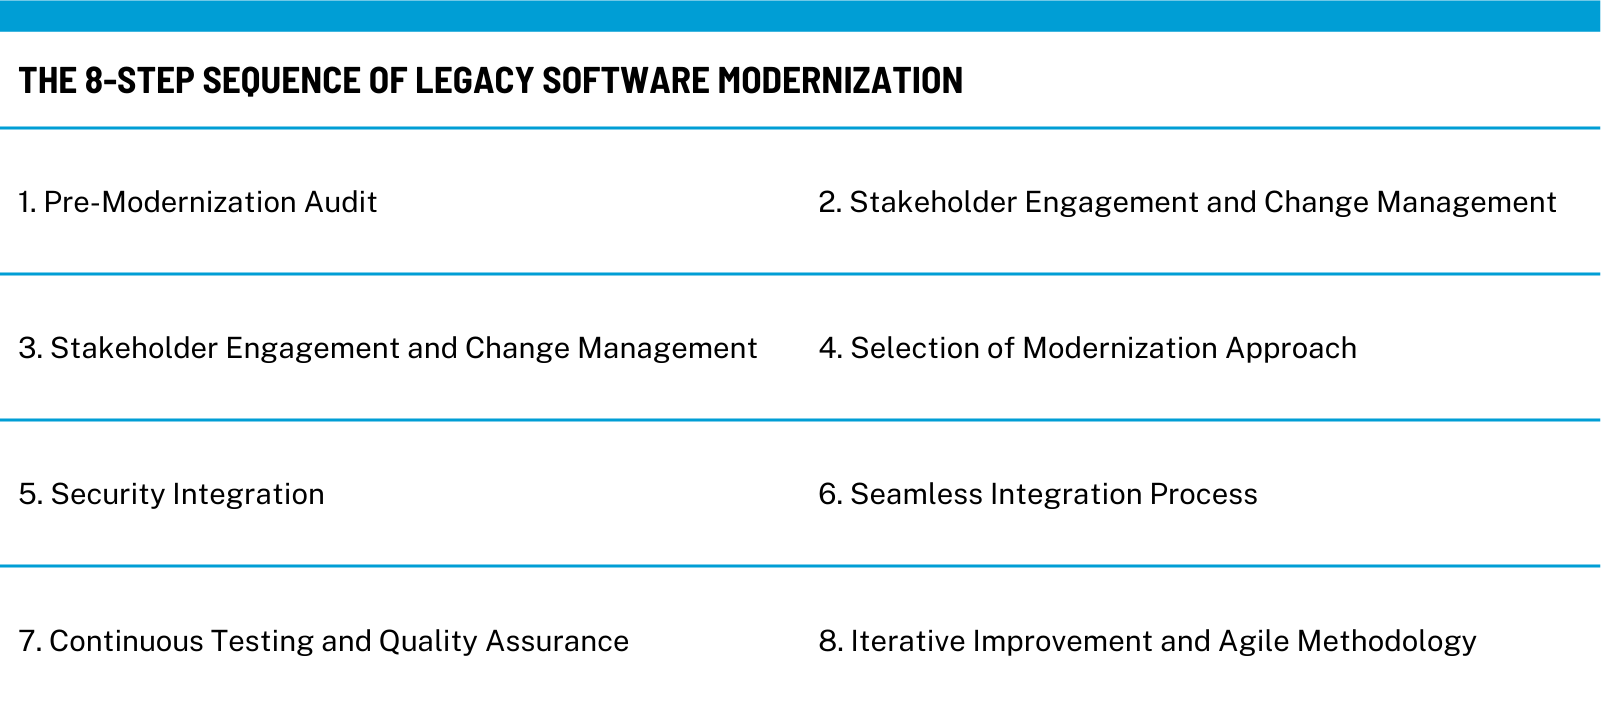 An informative diagram depicting the eight crucial steps in the Legacy Software Modernization process: starting with a Pre-Modernization Audit, followed by Stakeholder Engagement, Change Management, Selection of Modernization Approach, Security Integration, Seamless Integration Process, Continuous Testing and Quality Assurance, and concluding with Iterative Improvement and Agile Methodology.